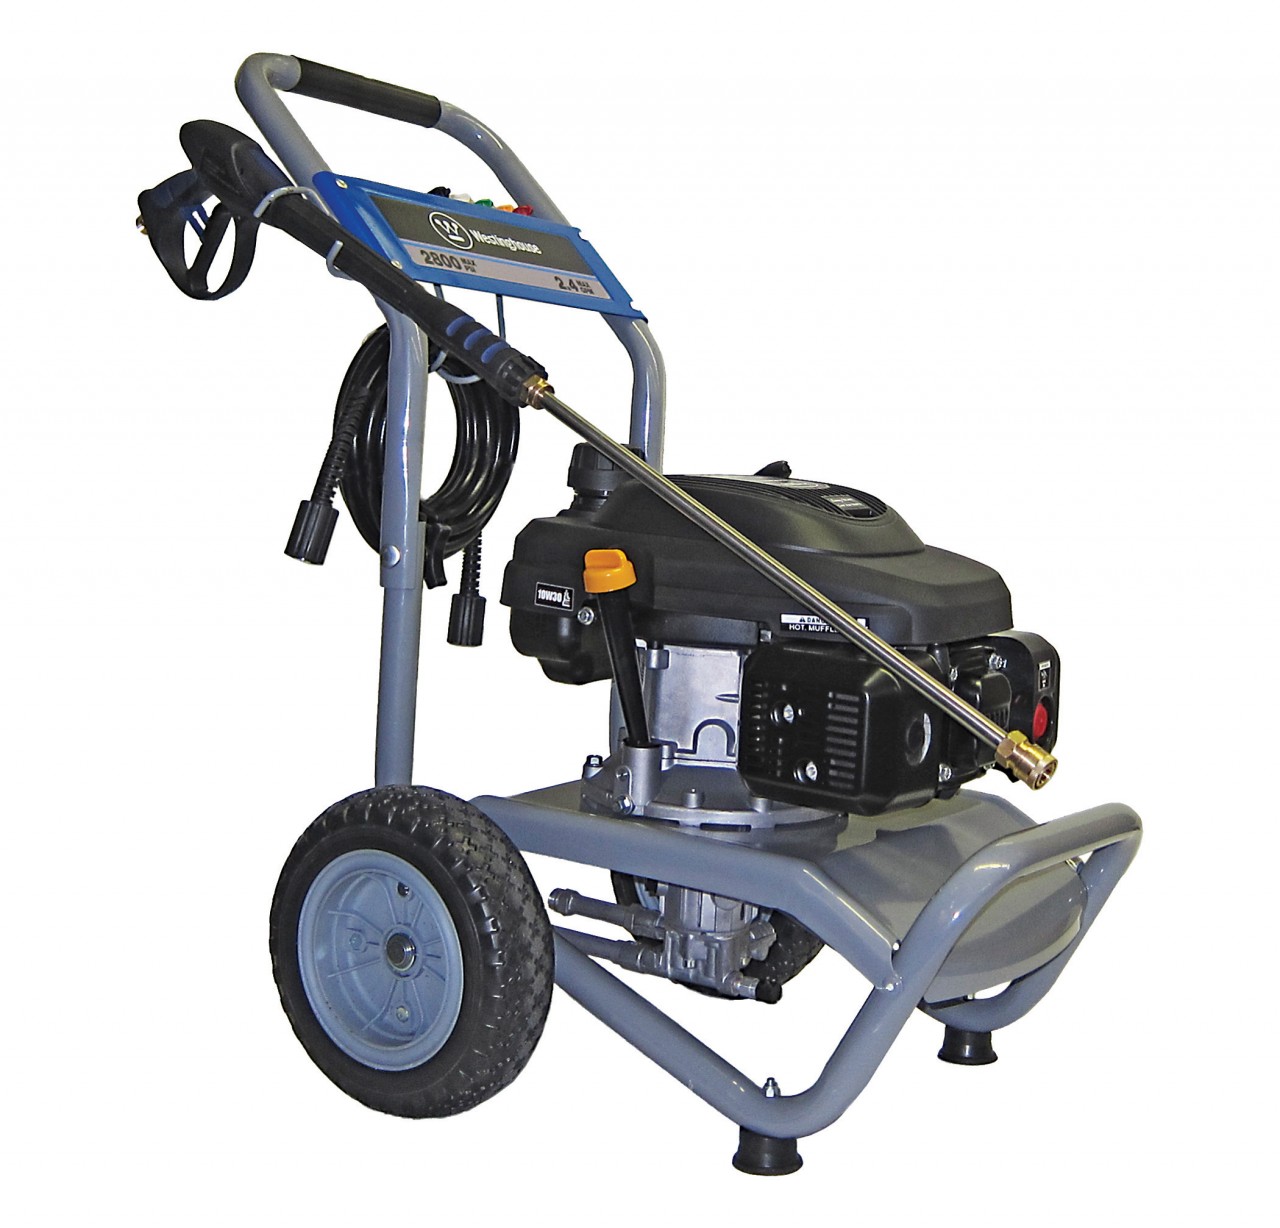 Westinghouse WP2800 2800 PSI, 2.2 GPM, 196cc OHV Gas Powered Pressure Washer